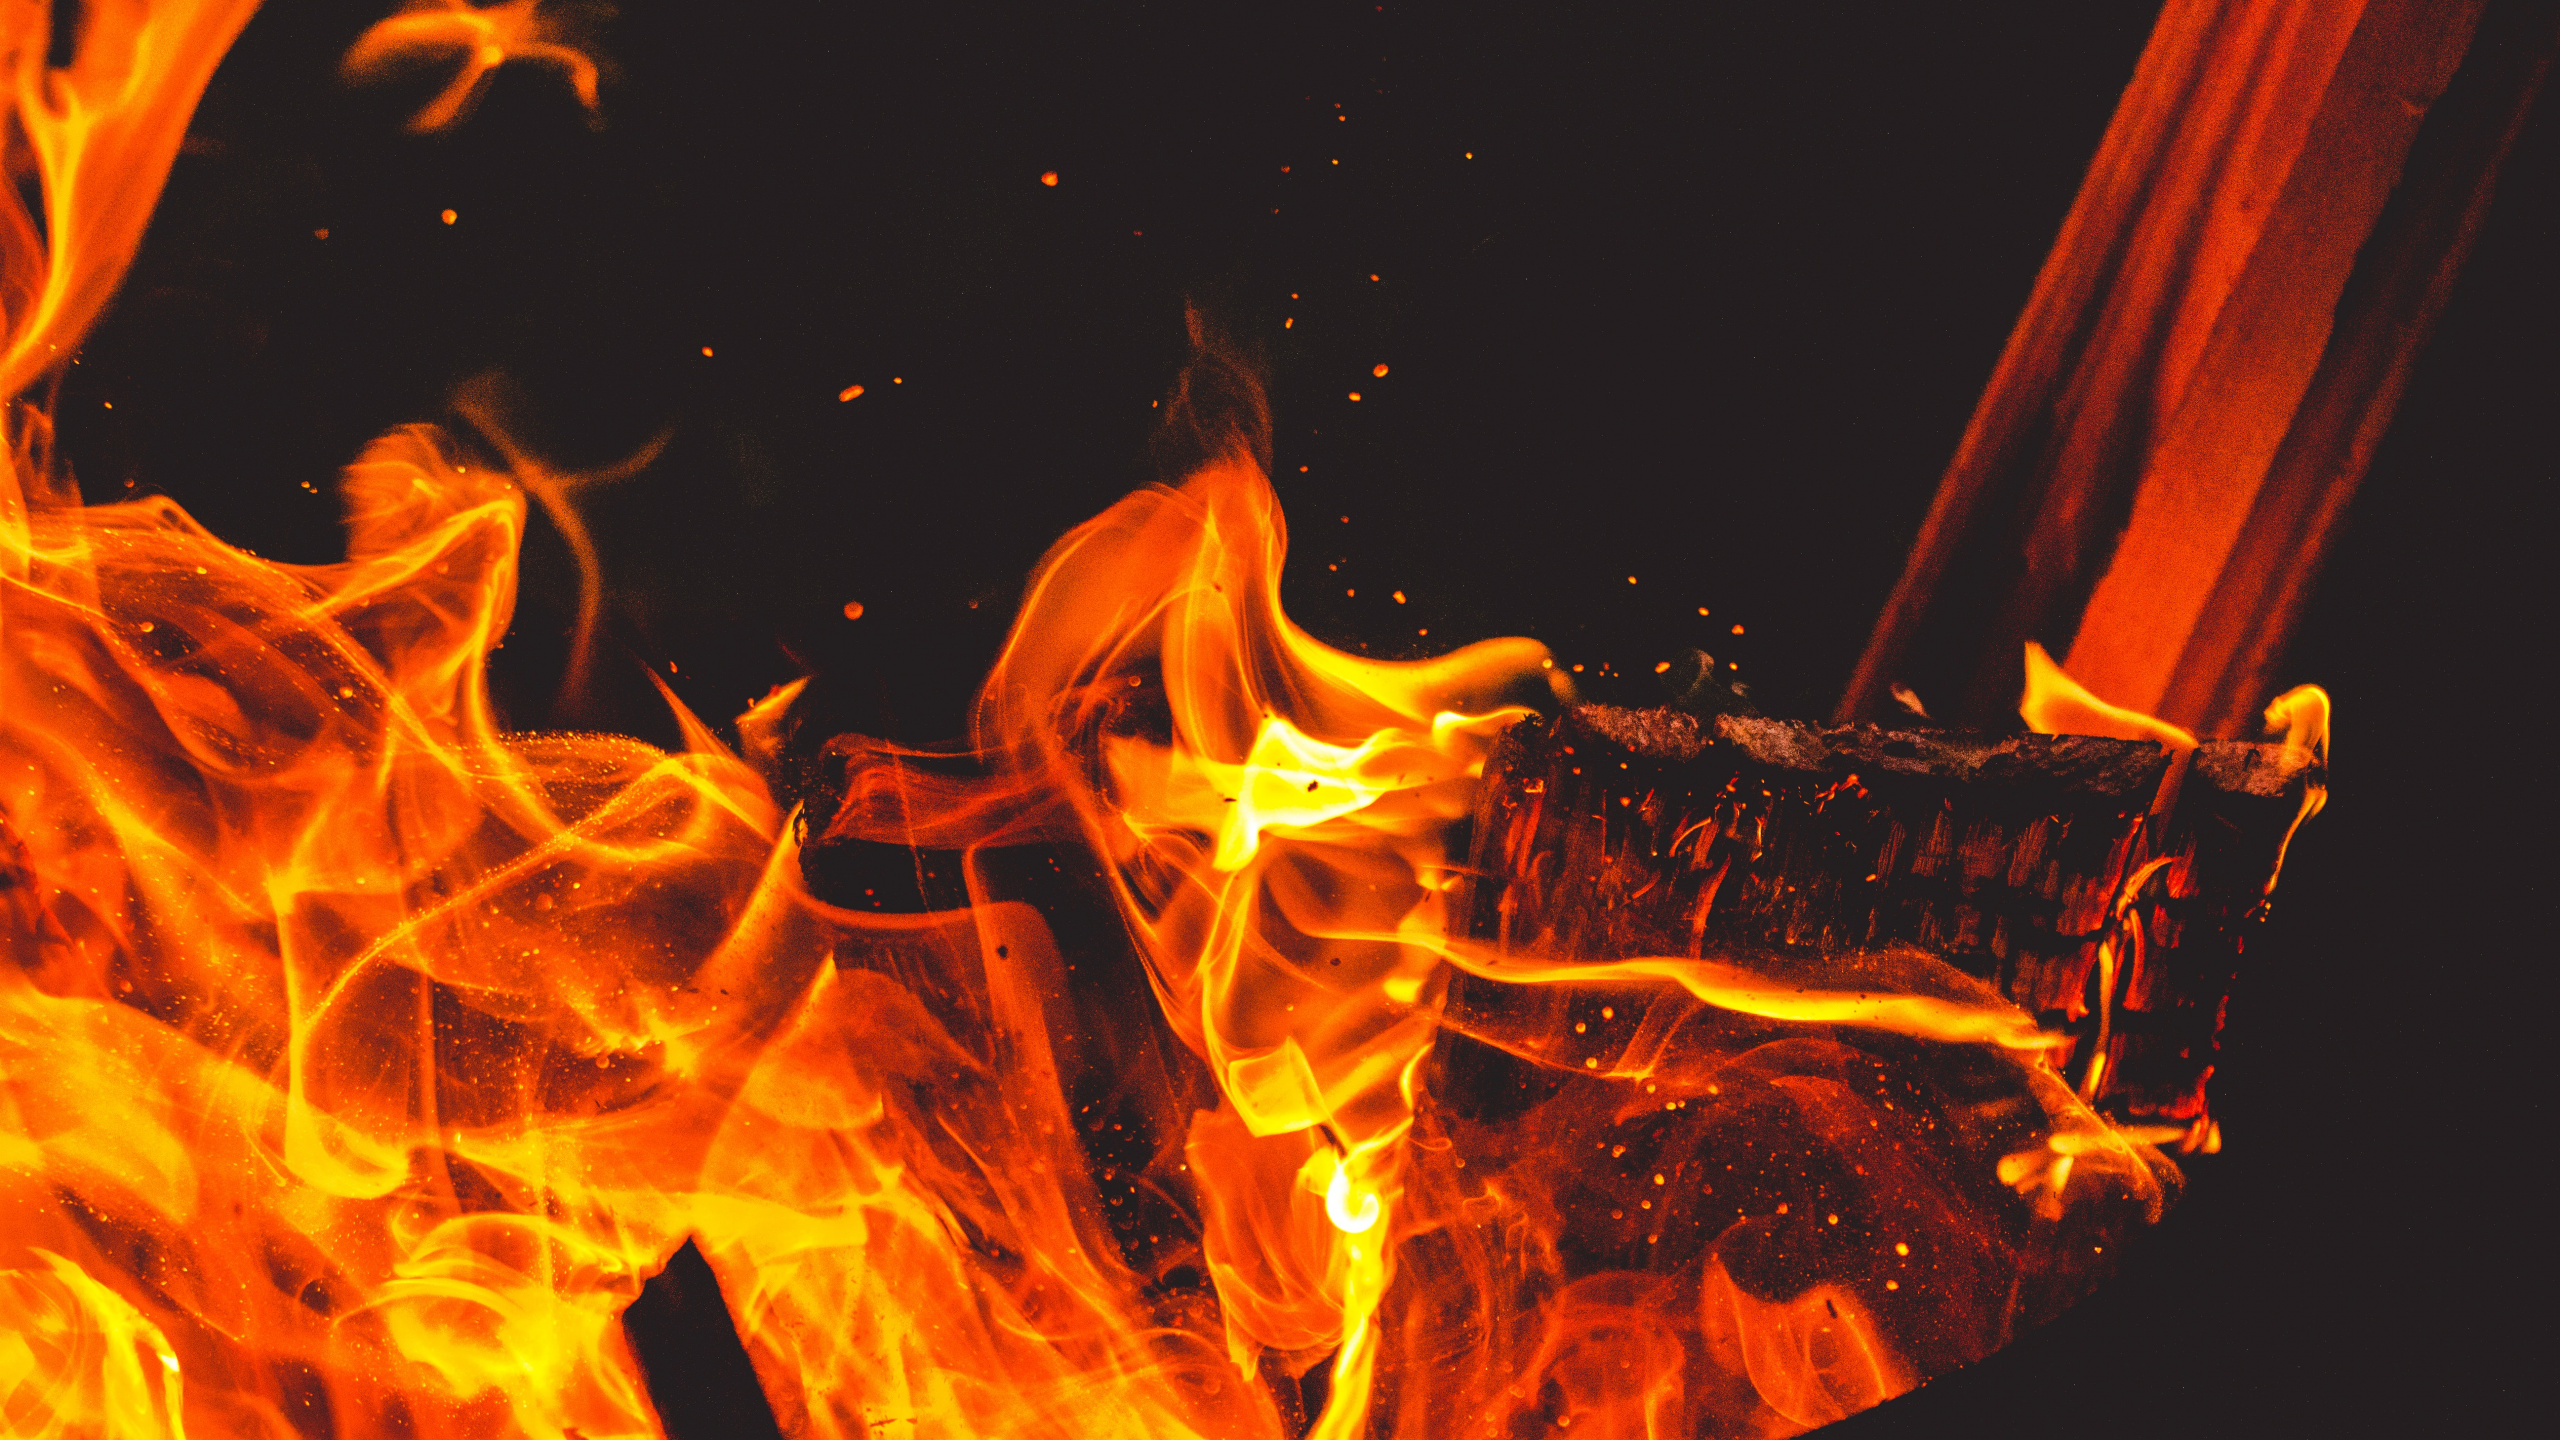 Orange and Yellow Flame Illustration. Wallpaper in 2560x1440 Resolution